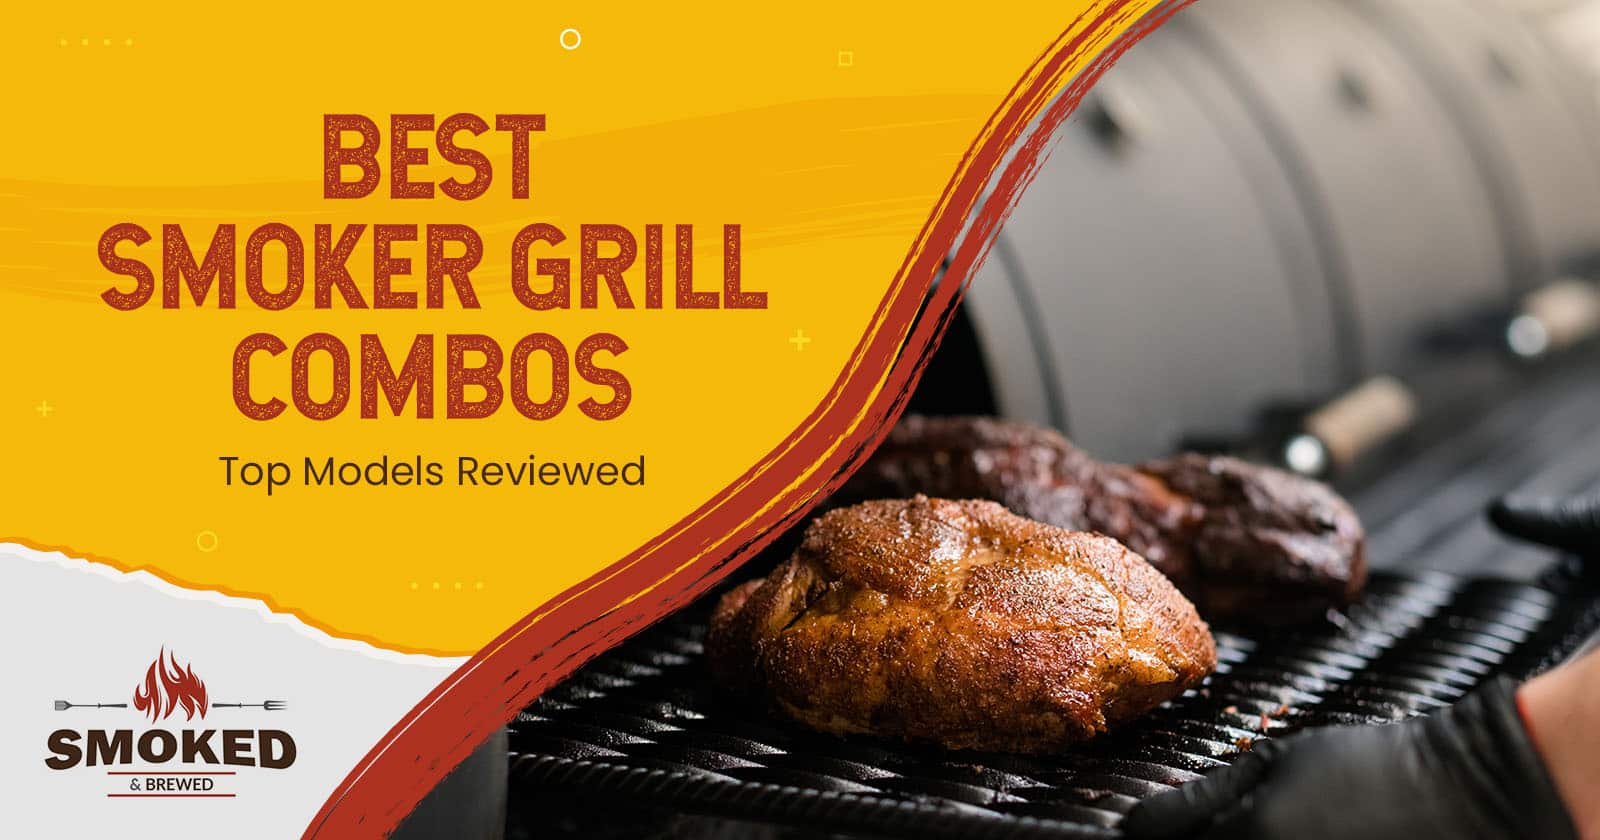 Best Smoker Grill Combos – Top Models Reviewed